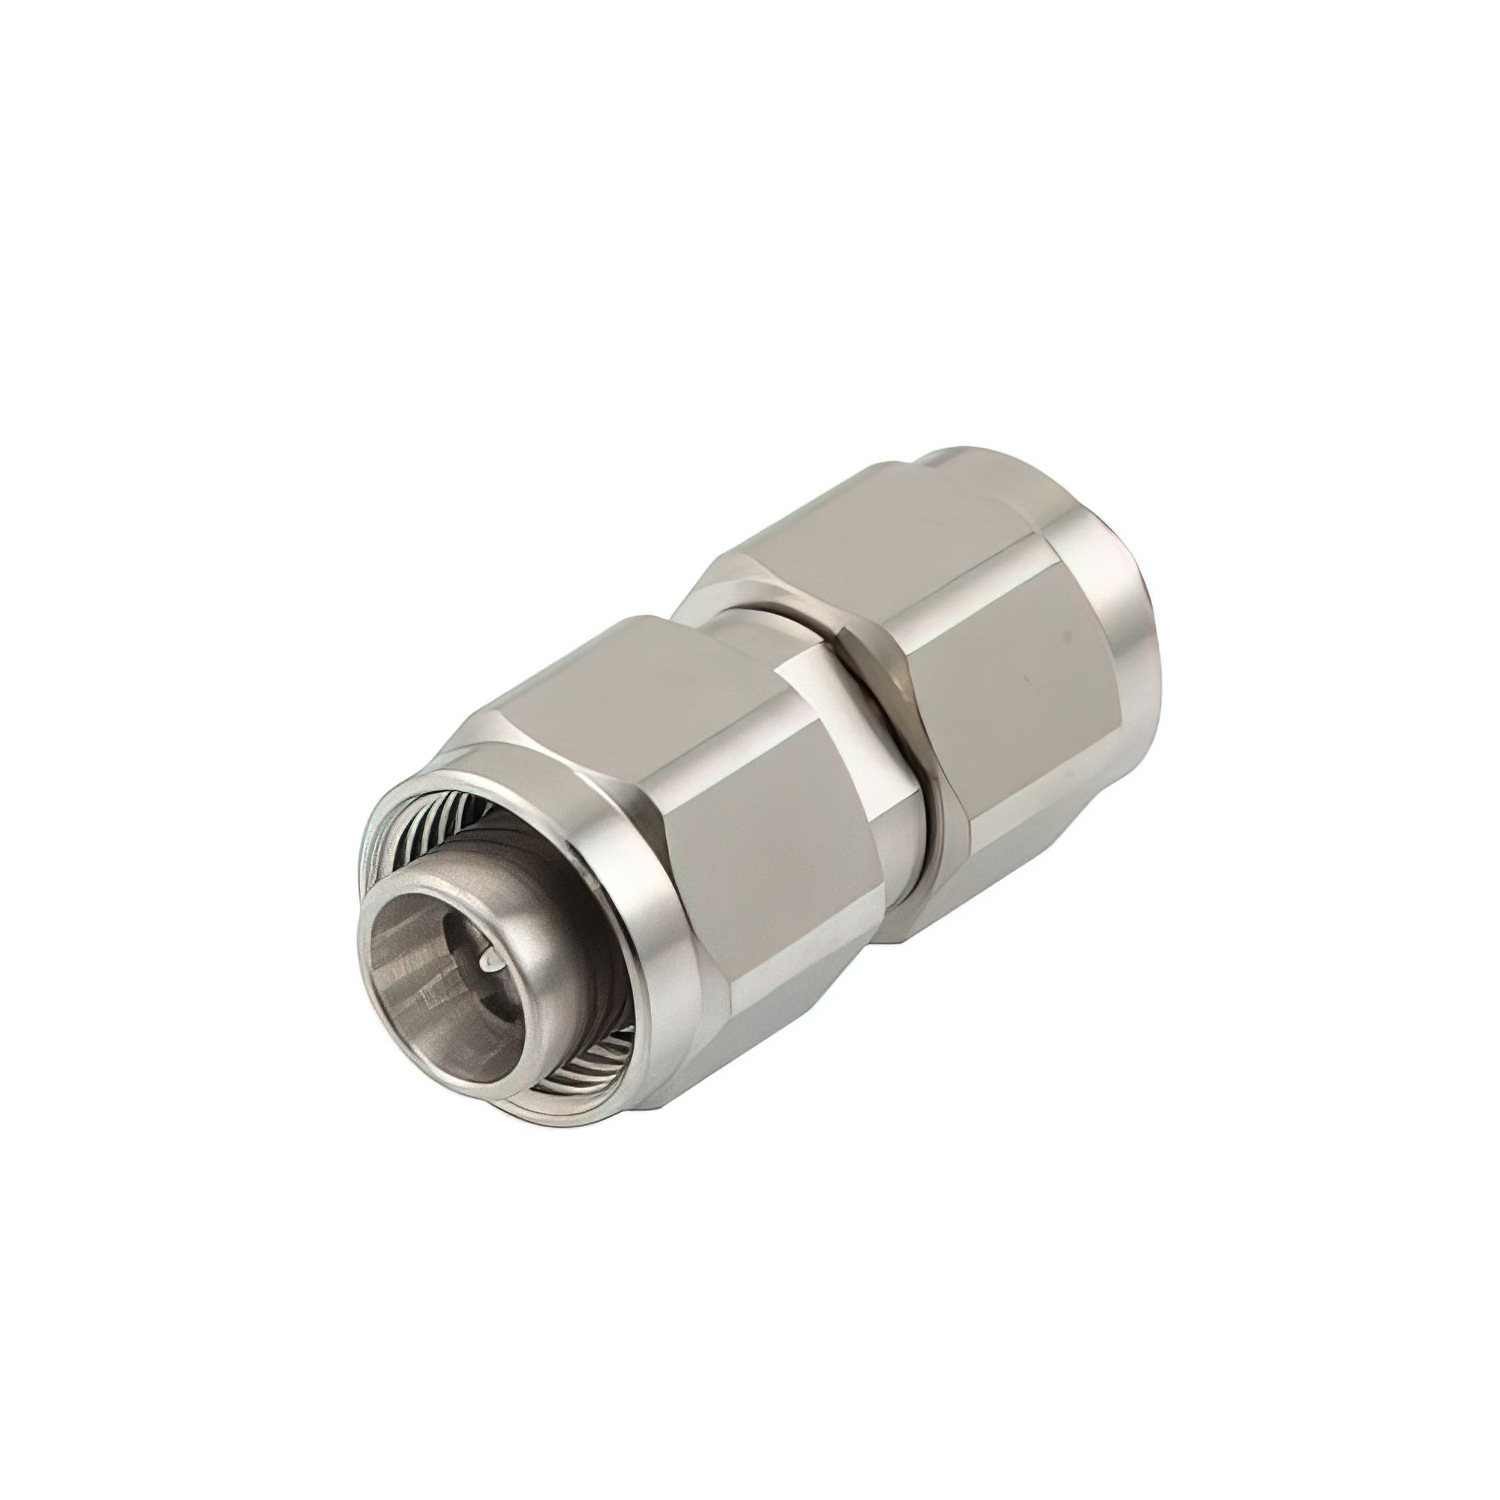 Low PIM 2.2-5 male to 2.2-5 male adapter1